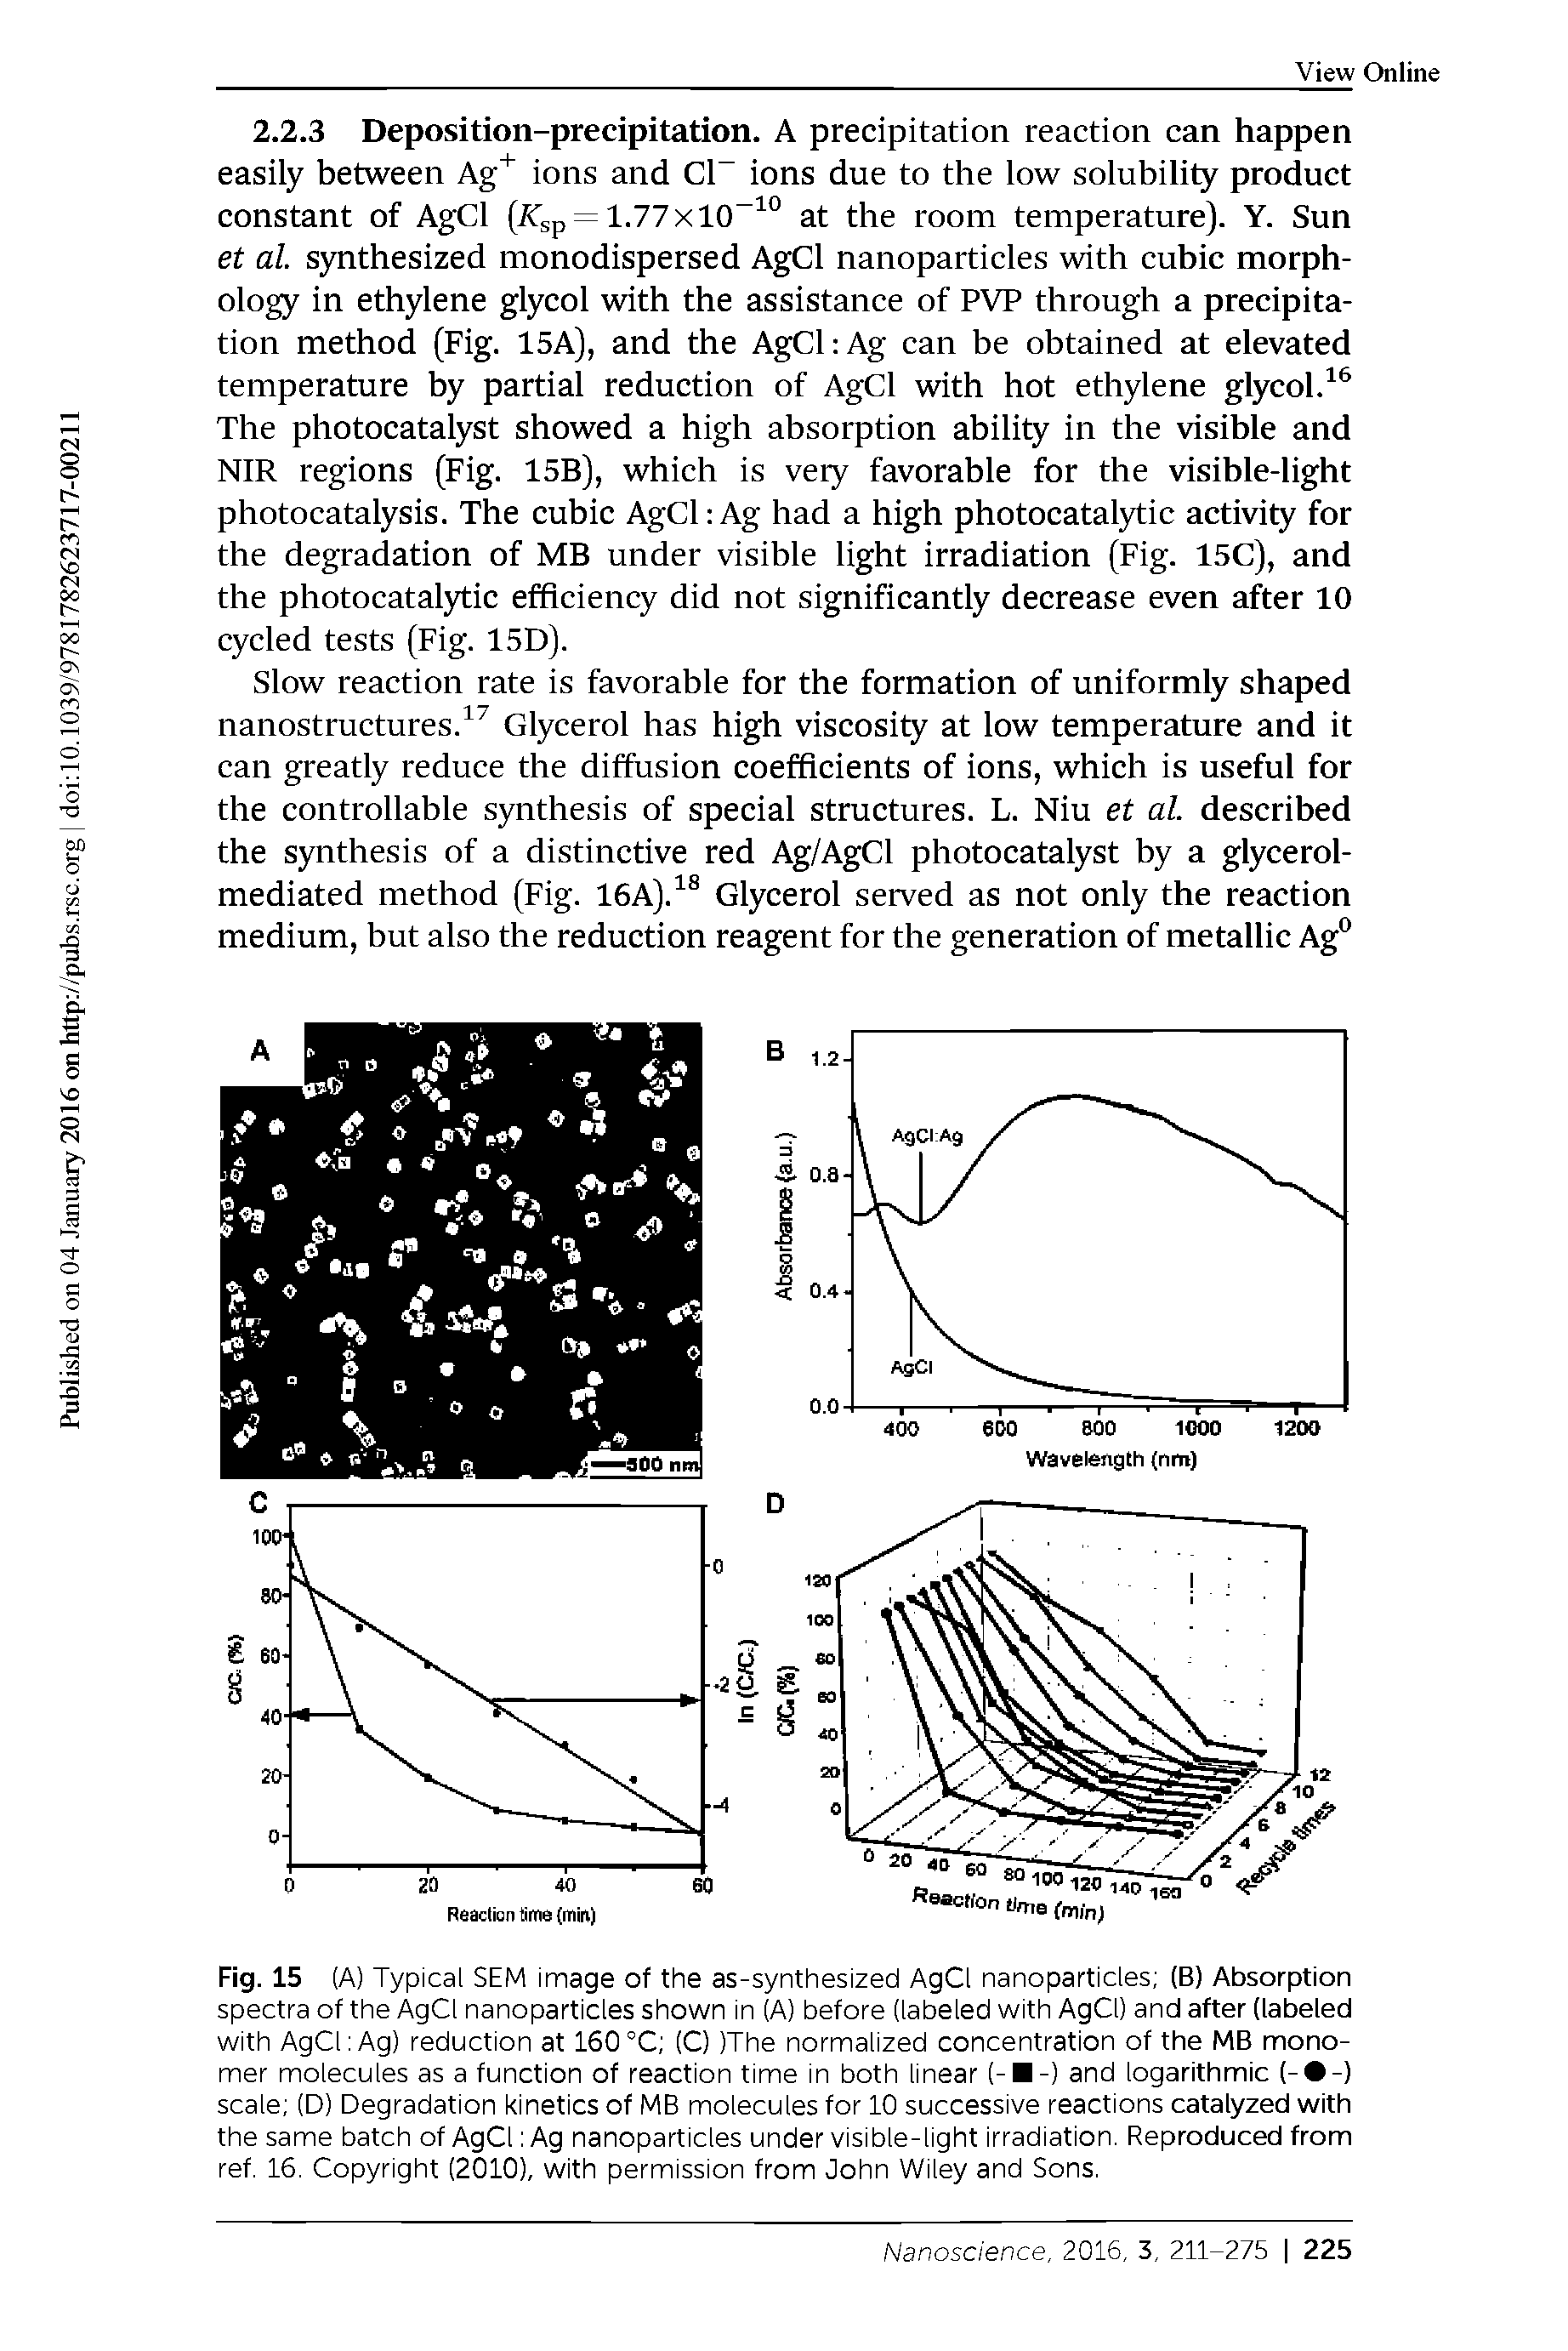 Fig. 15 (A) Typical SEM image of the as-synthesized AgCl nanoparticles (B) Absorption spectra of the AgCl nanoparticles shown in (A) before (labeled with AgCl) and after (labeled with AgCLAg) reduction at 160 °C (C) )The normalized concentration of the MB monomer molecules as a function of reaction time in both linear (- -) and logarithmic (- -) scale (D) Degradation kinetics of MB molecules for 10 successive reactions catalyzed with the same batch of AgCl Ag nanoparticles under visible-light irradiation. Reproduced from ref. 16. Copyright (2010), with permission from John Wiley and Sons.